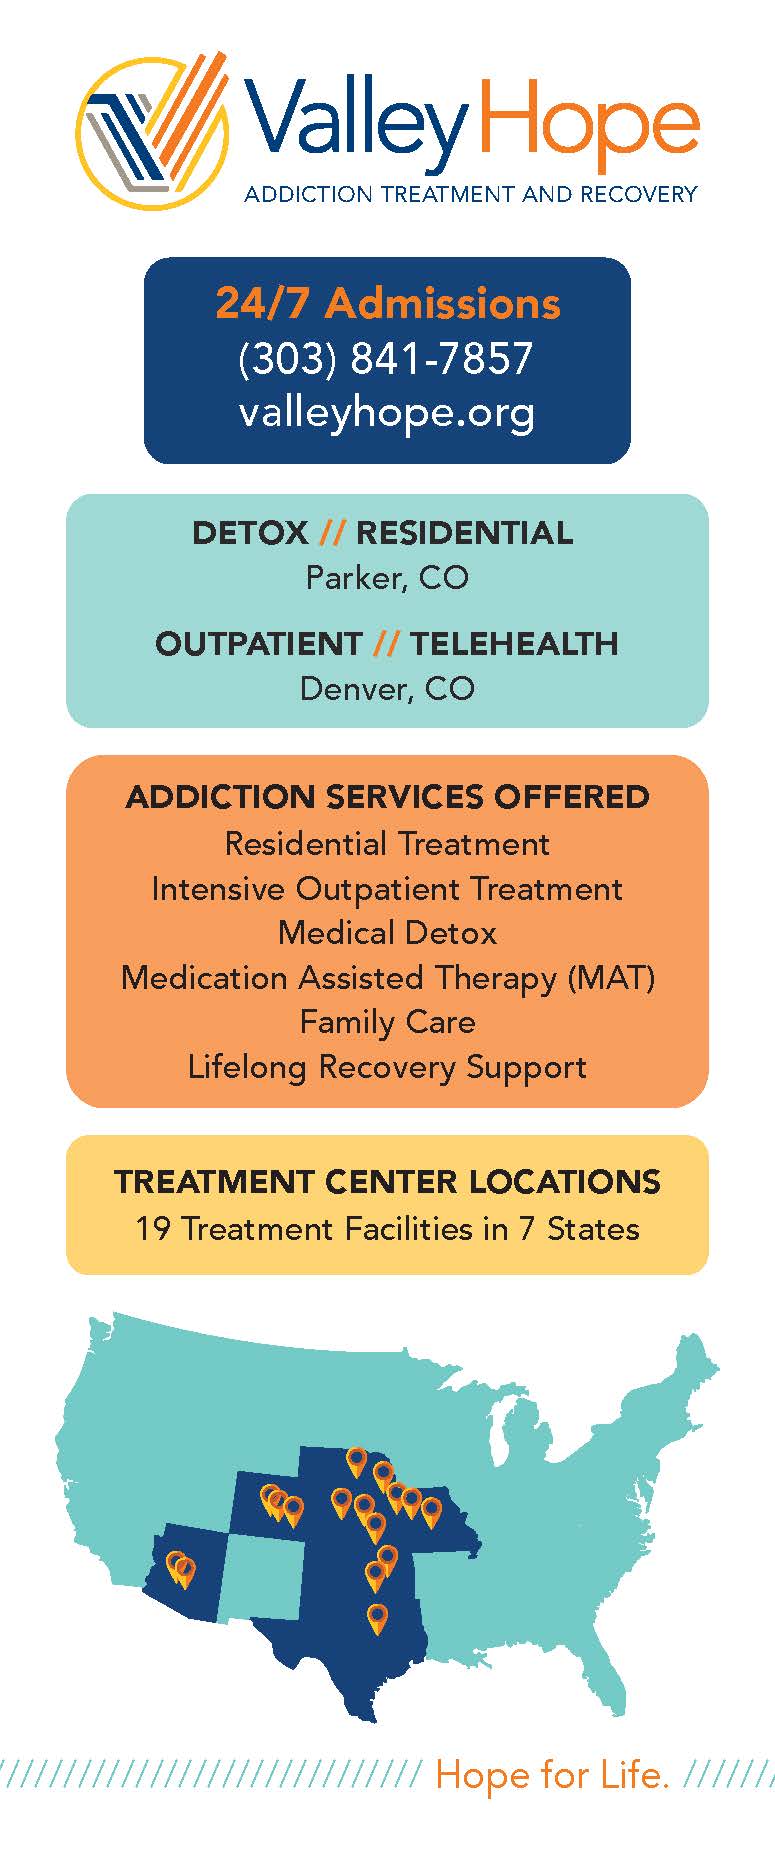 Valley Hope’s Veteran and Military Services Program strives to serve every Veteran and their family with competent, compassionate and responsive addiction treatment in an environment that understands and supports the unique experiences of Veterans and military families.
Click the link in the title for more information.